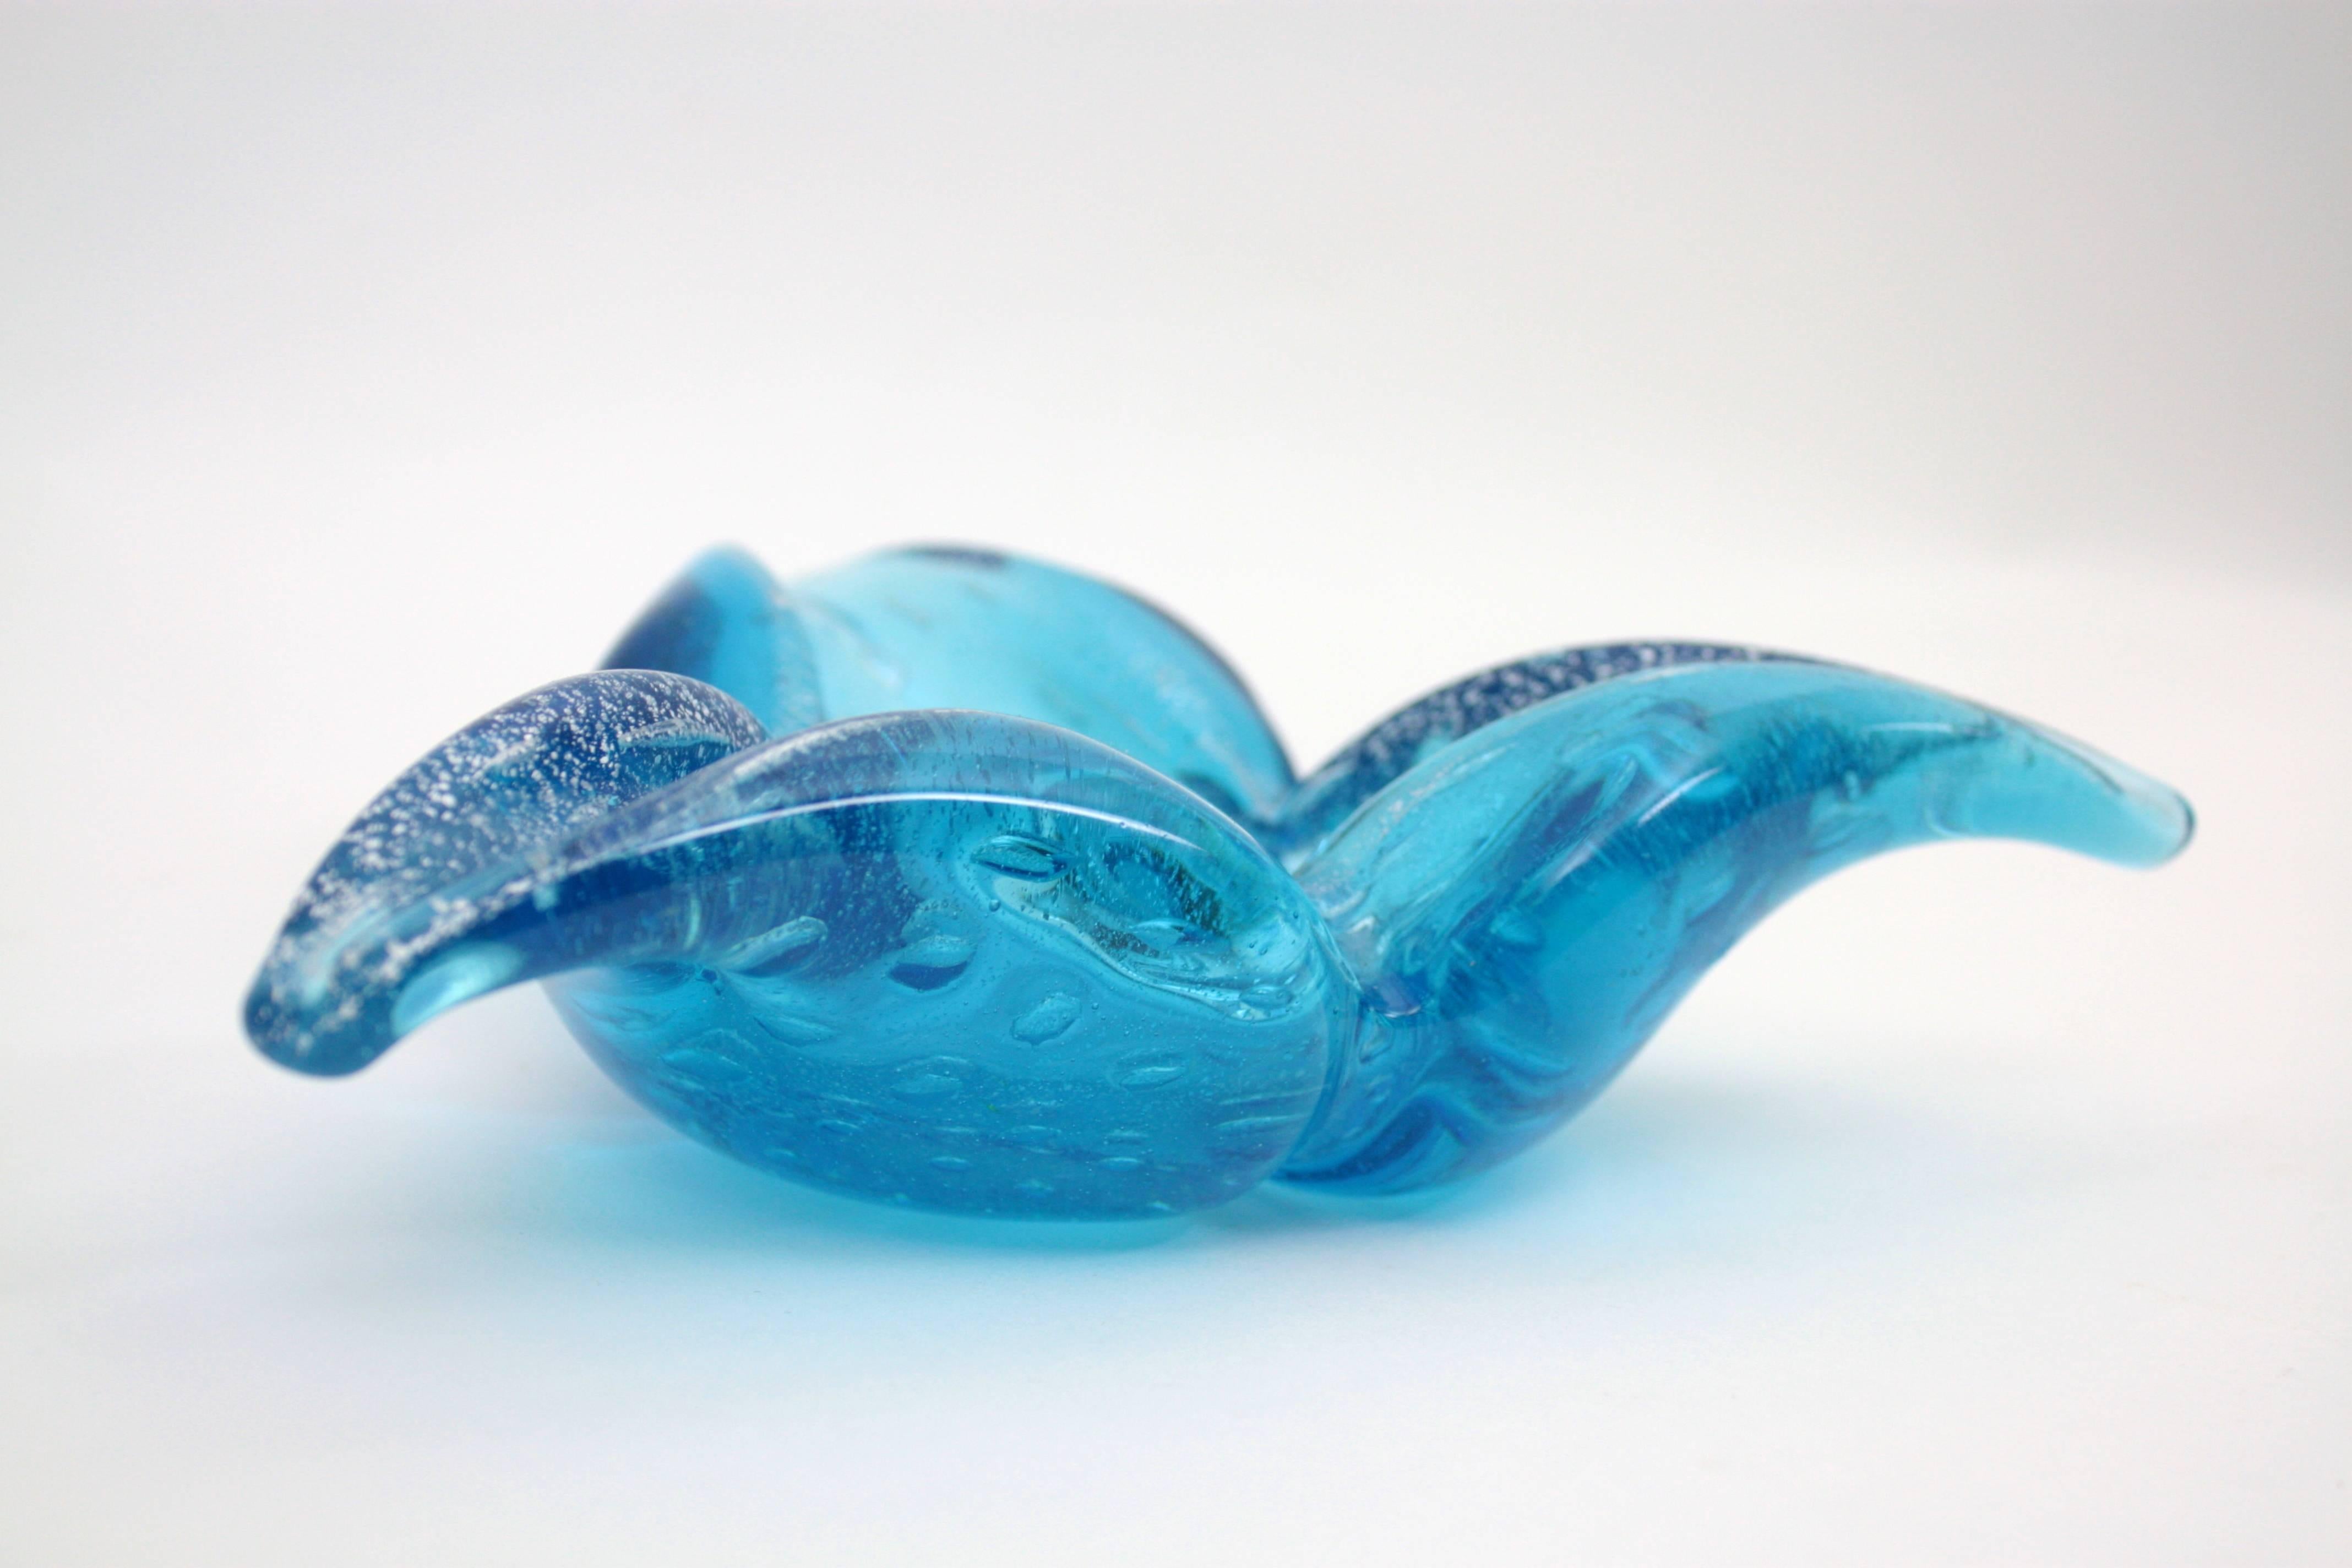 Italian Murano Blue Glass Bowl or Ashtray with Air Bubbles and Silver Flecks  For Sale 1